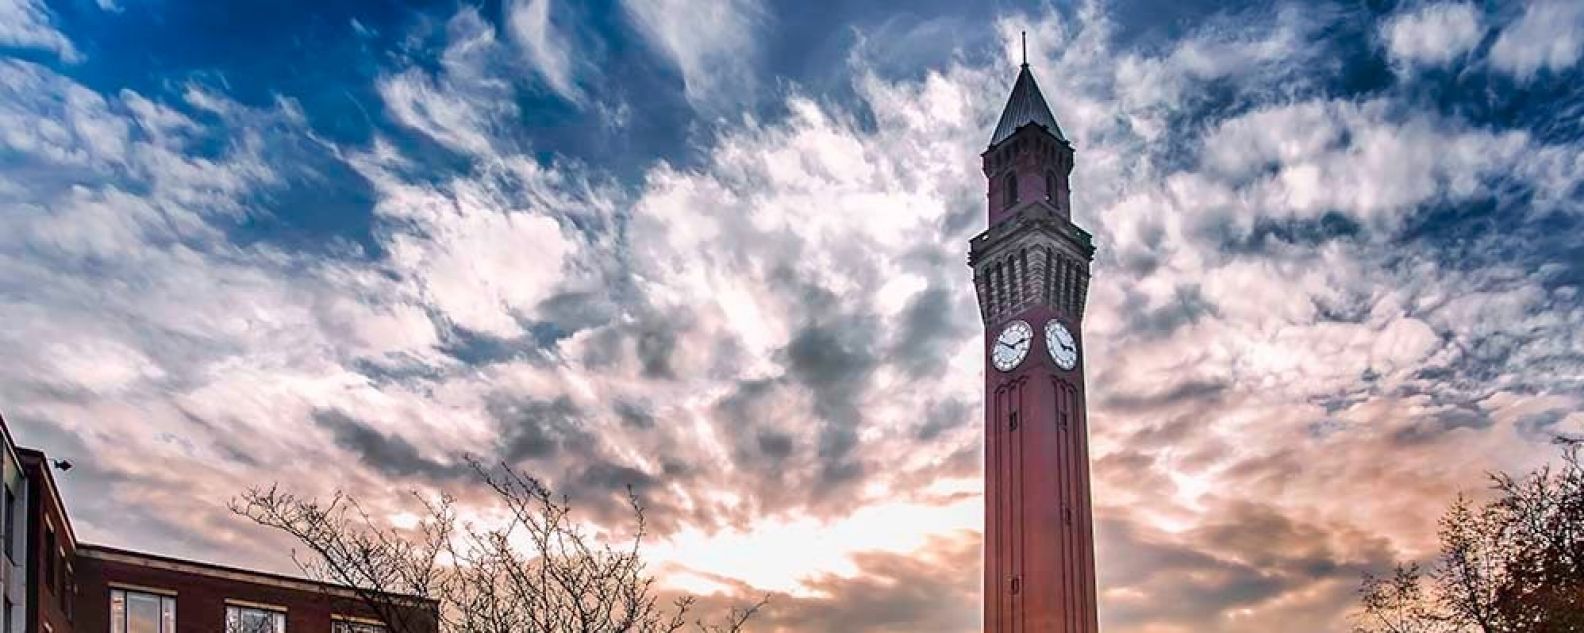 View of the University of Birmingham campus and clock tower